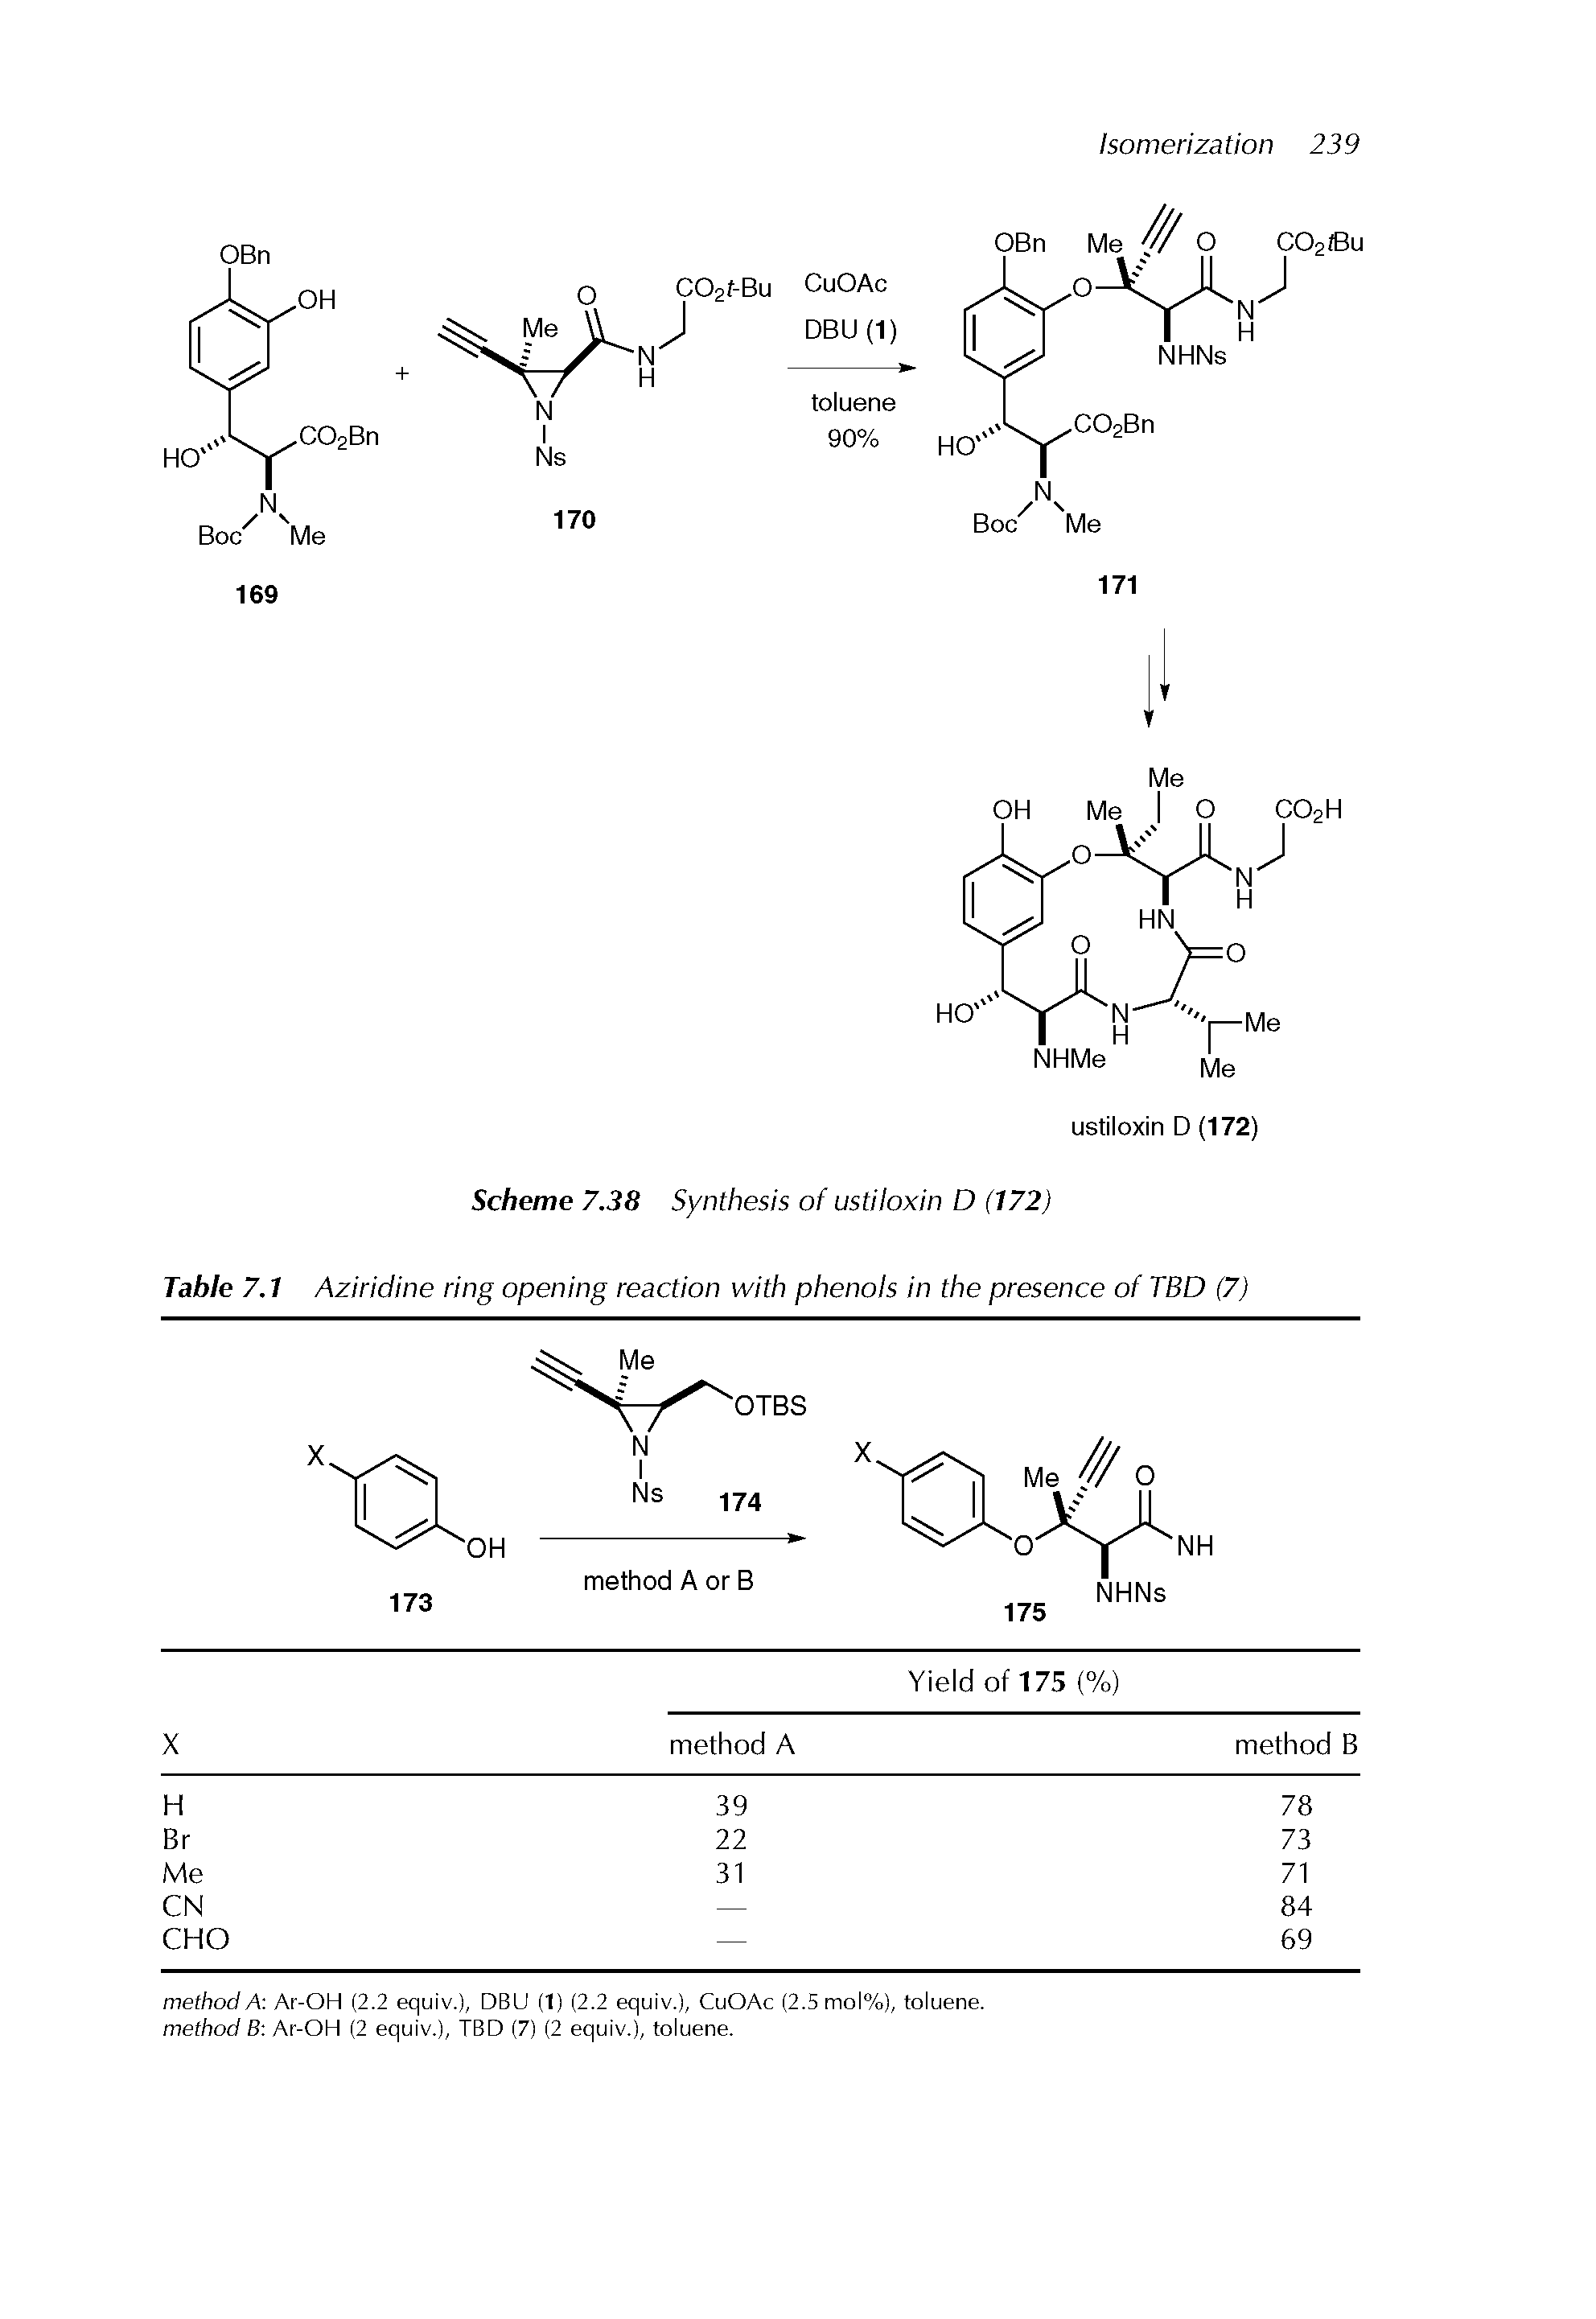 Table 7.1 Aziridine ring opening reaction with phenols in the presence of TBD (7)...